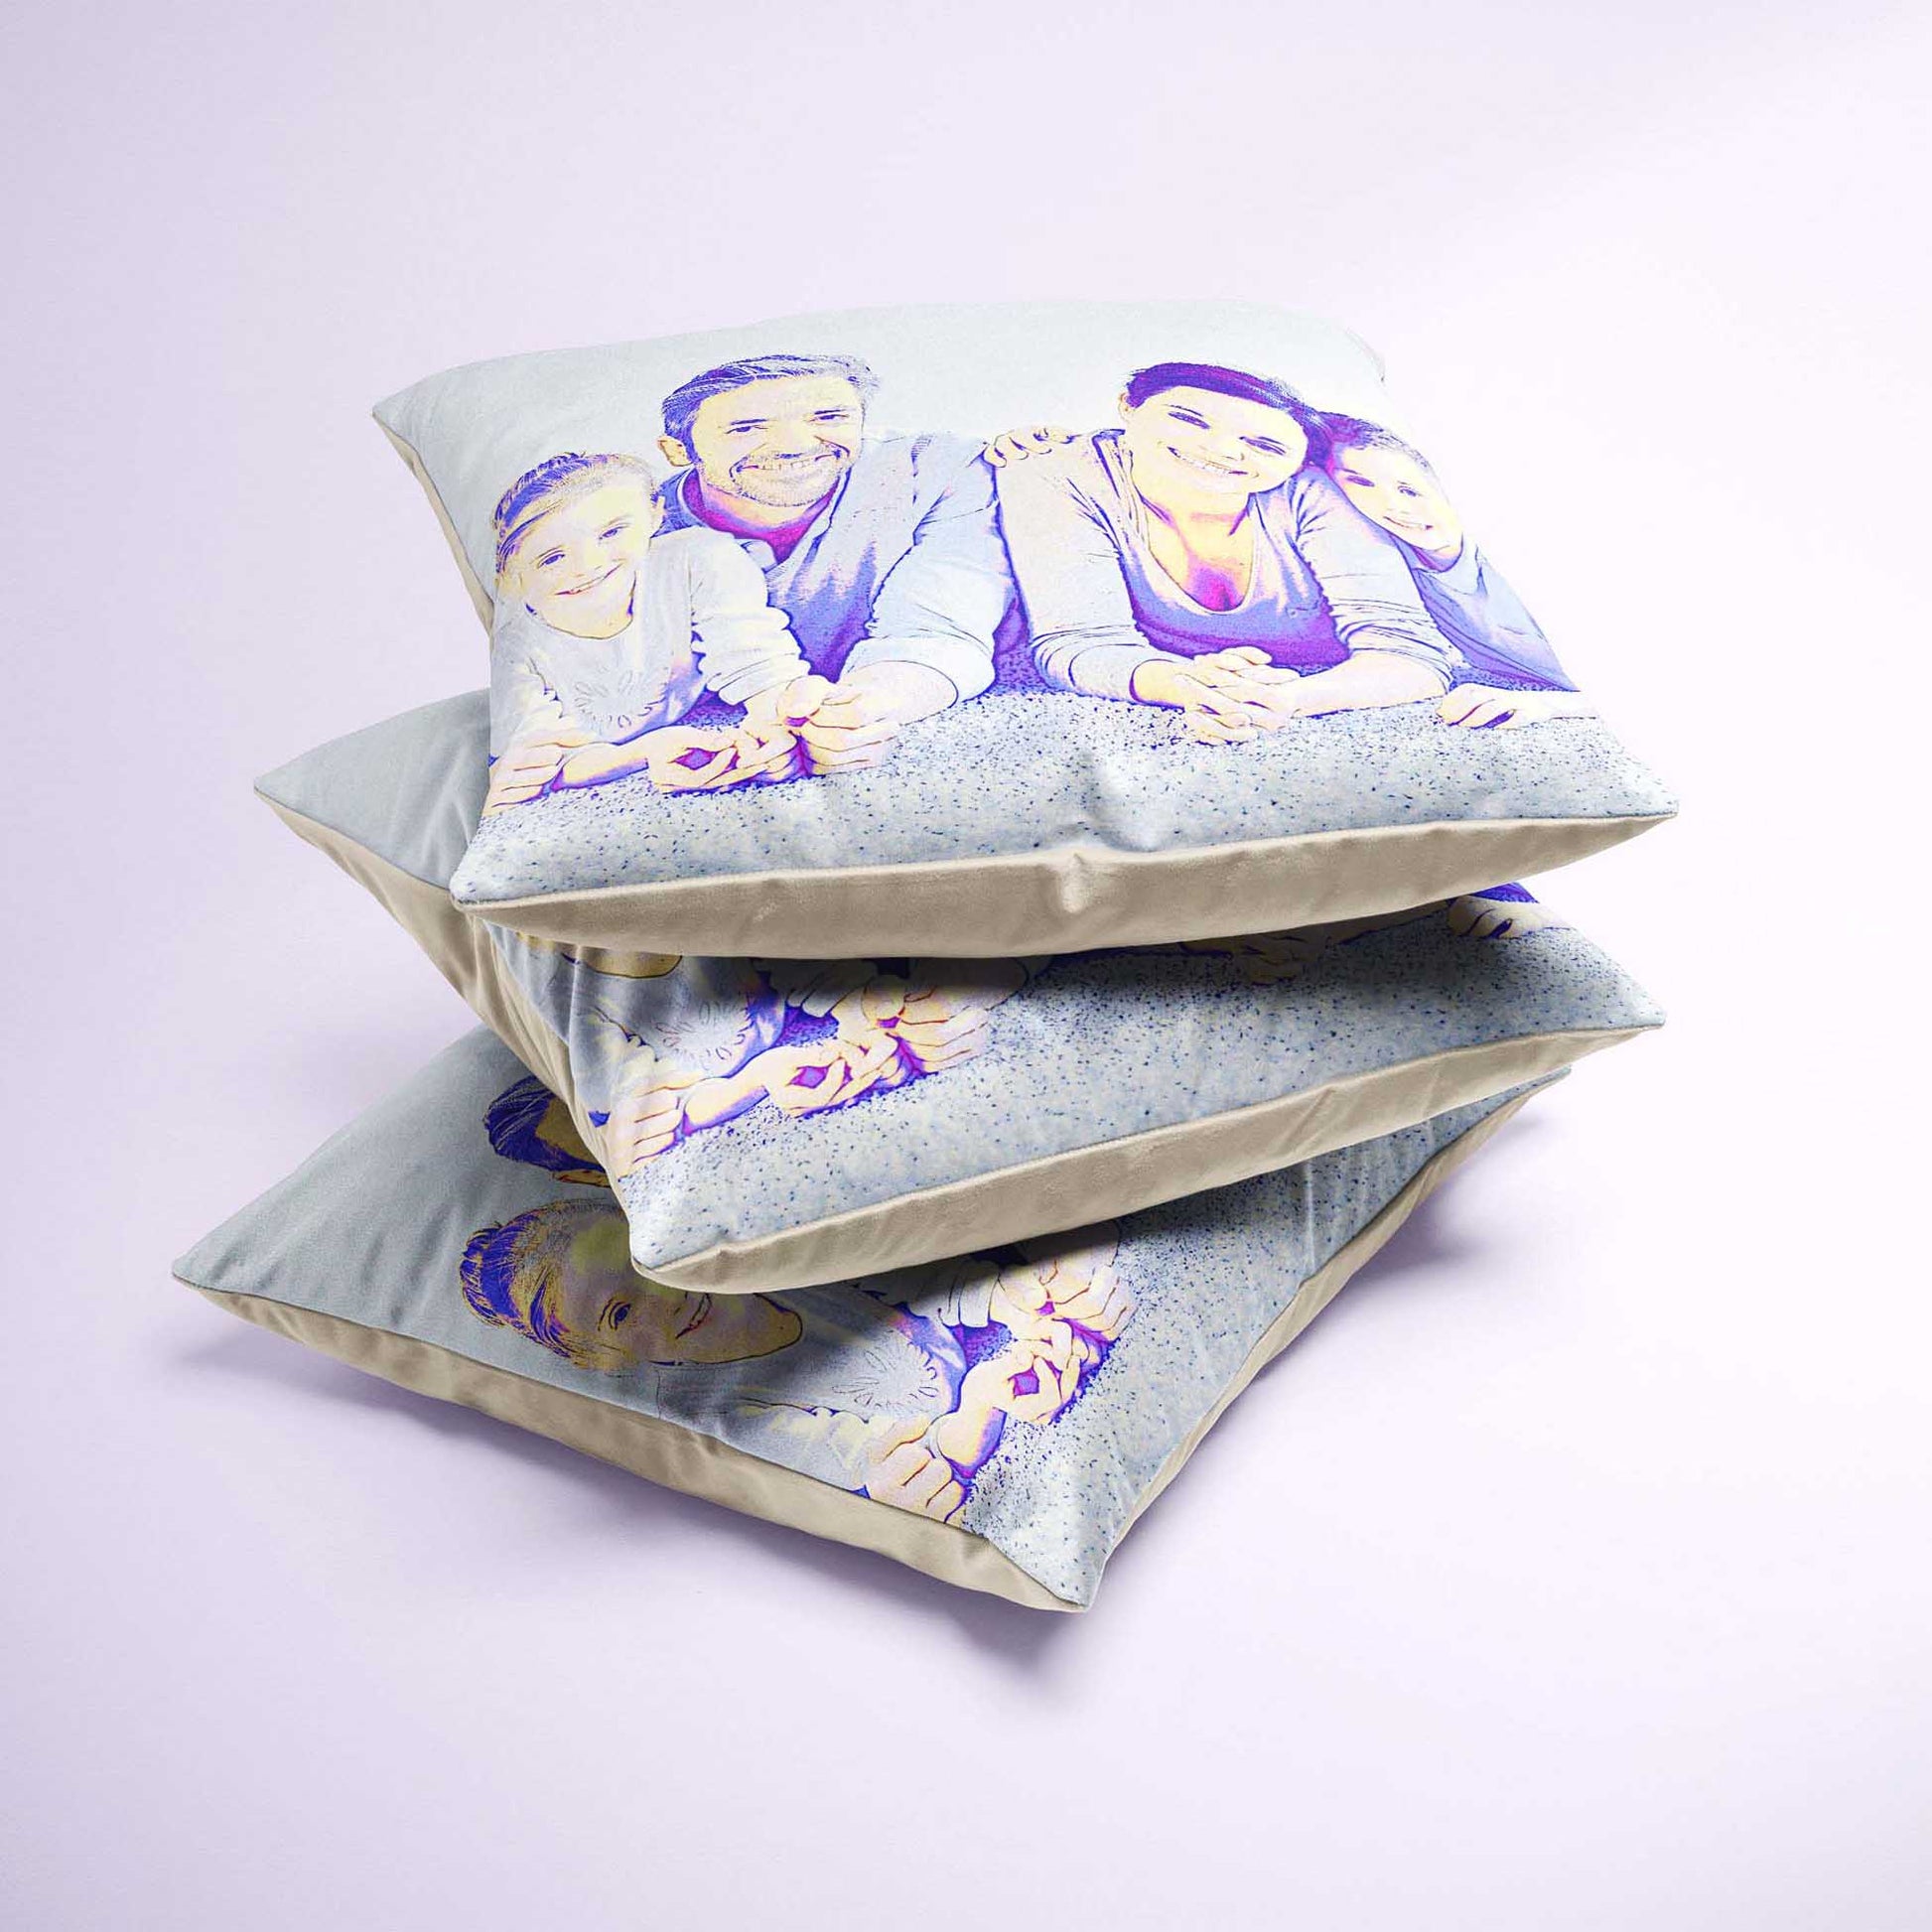 Introducing our Personalised Blue and Purple Cushion, the epitome of comfort and style. Made from soft velvet, it provides a luxurious and cosy experience. This unique furnishing showcases original art